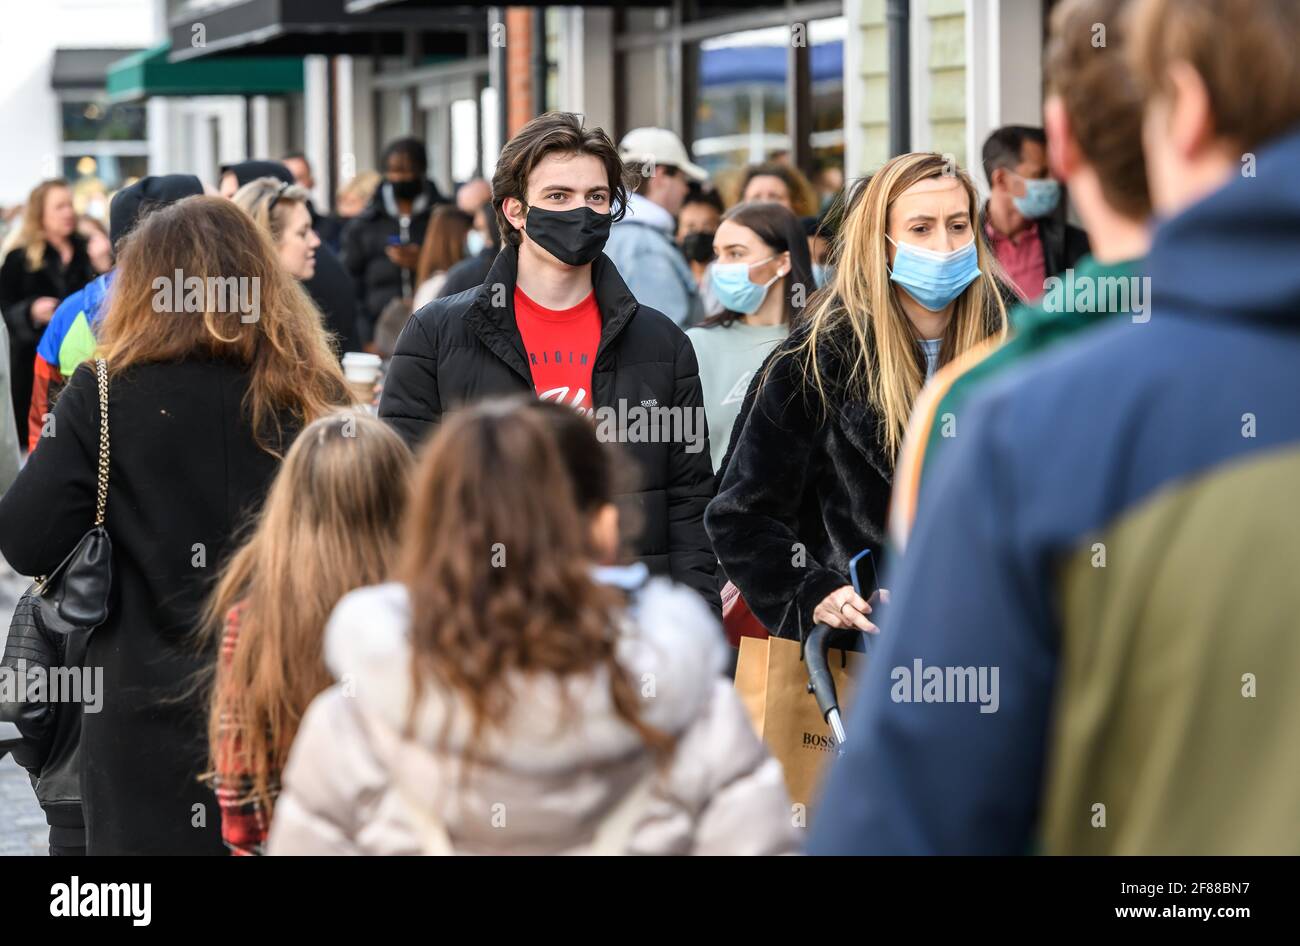 Cannock, Staffordshire, UK. 12th Apr, 2021. Crowds of shoppers at the McArthurGlen Designer Outlet in Cannock, Staffordshire, West Midlands, as non-essential shops reopen for the first time after lockdown. Picture by Credit: Simon Hadley/Alamy Live News Stock Photo